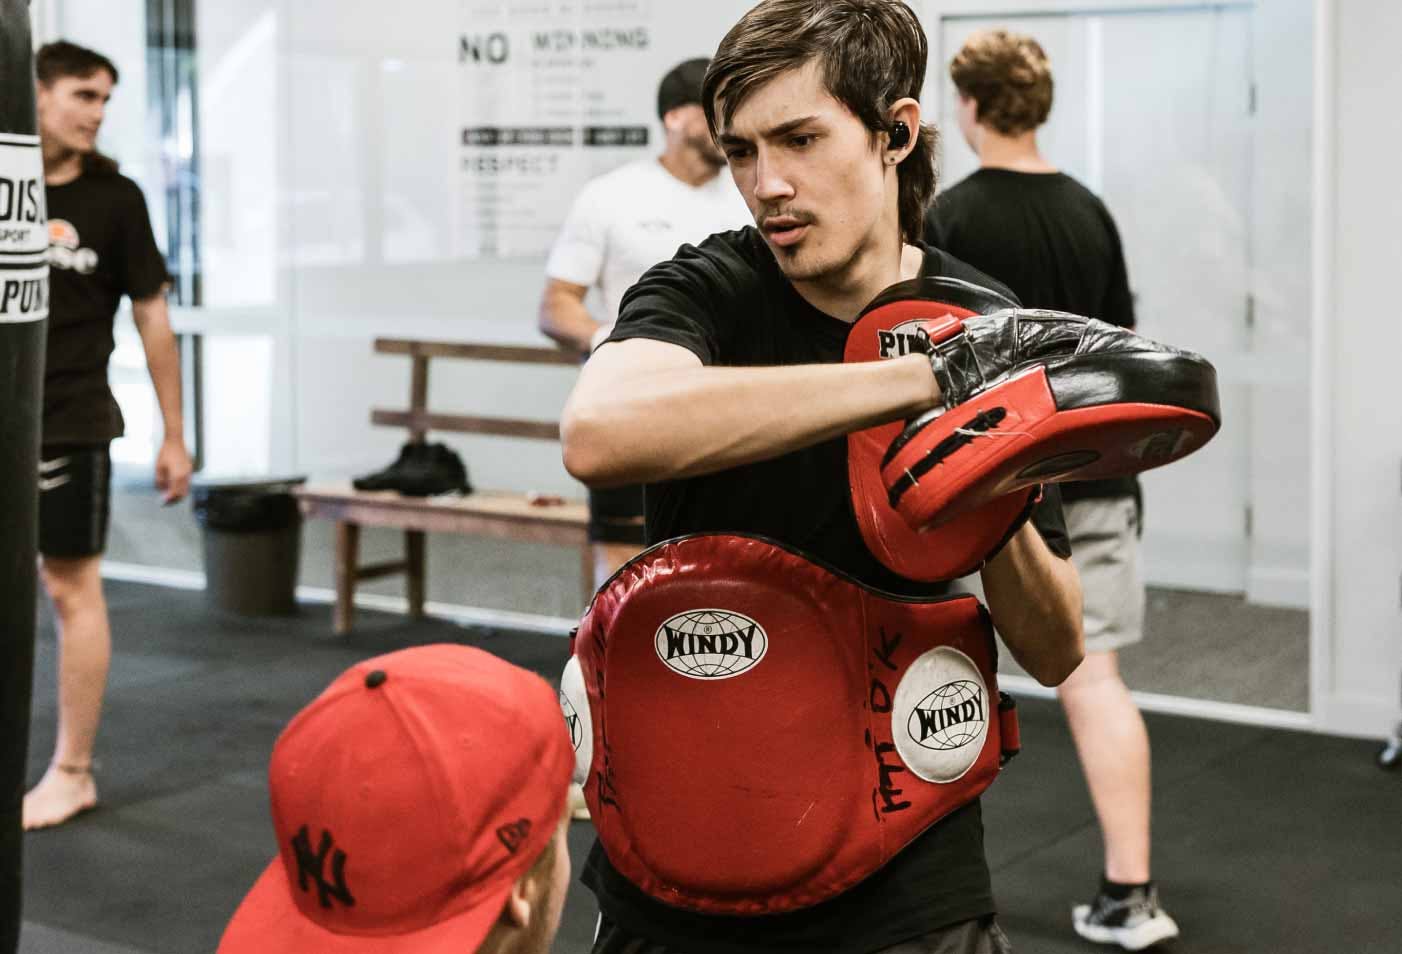 Young man practicing boxing with red gloves